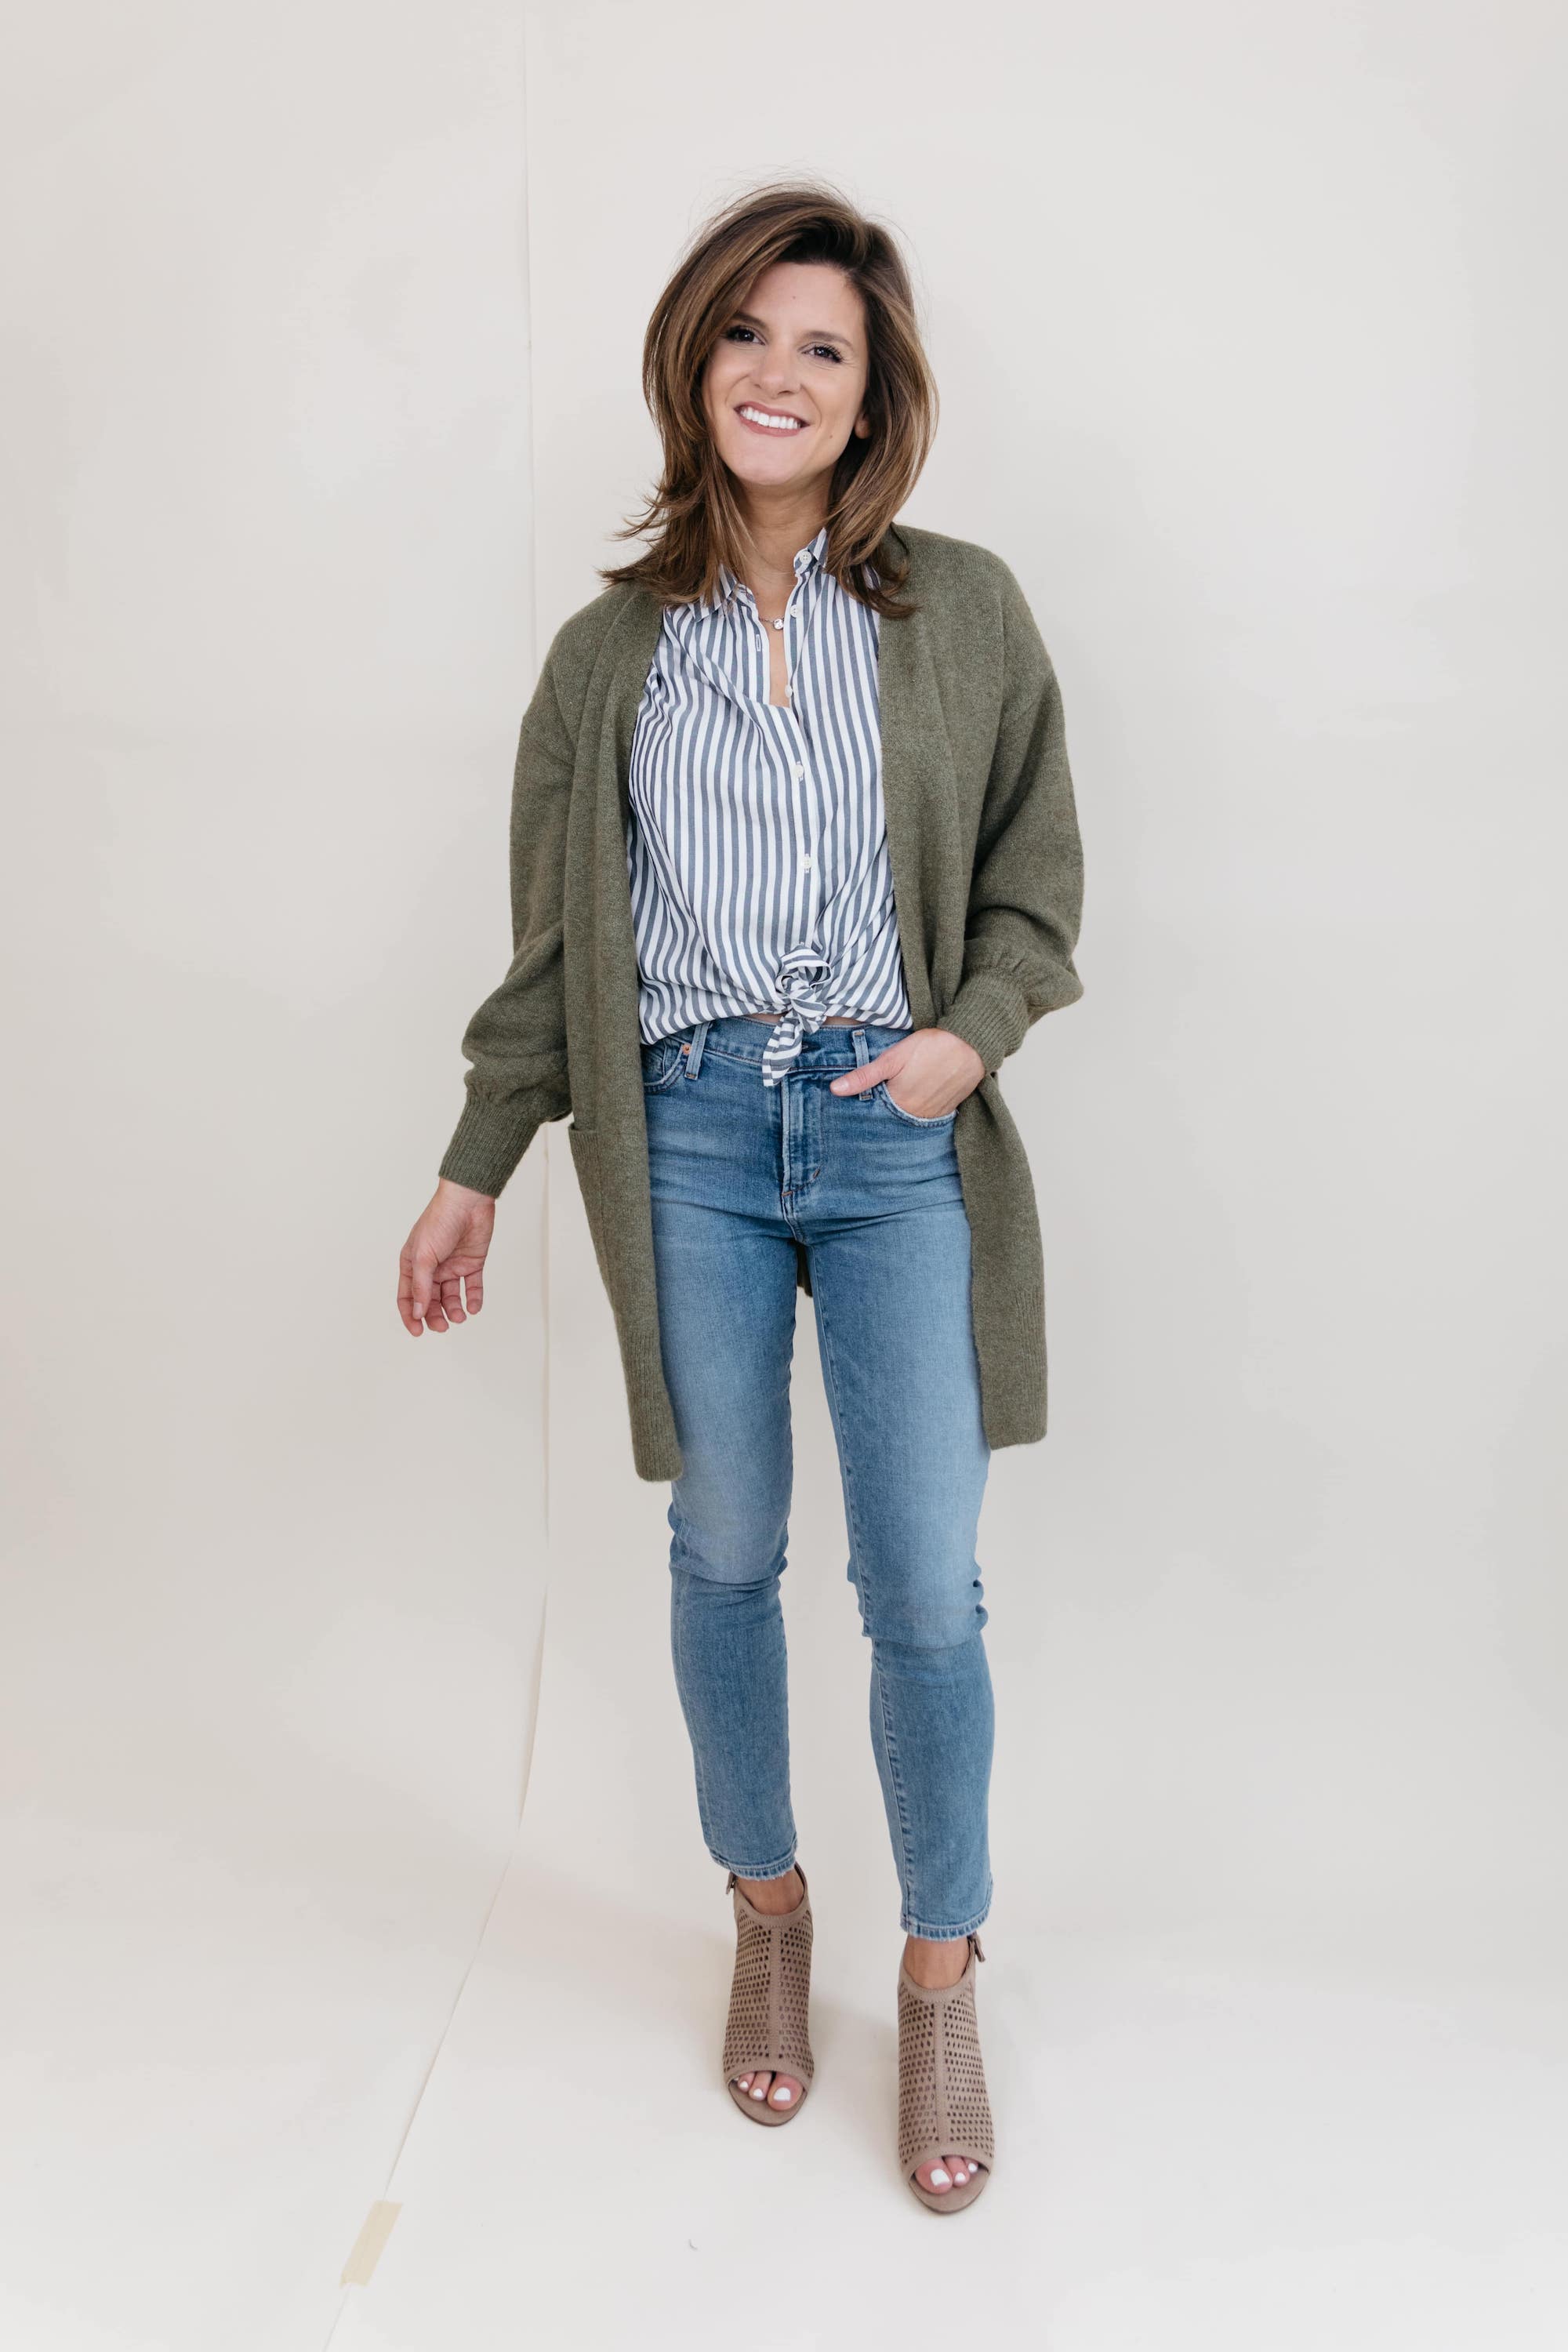 light skinny jeans, striped buttonup, olive green cardigan, tan peep toe booties 2